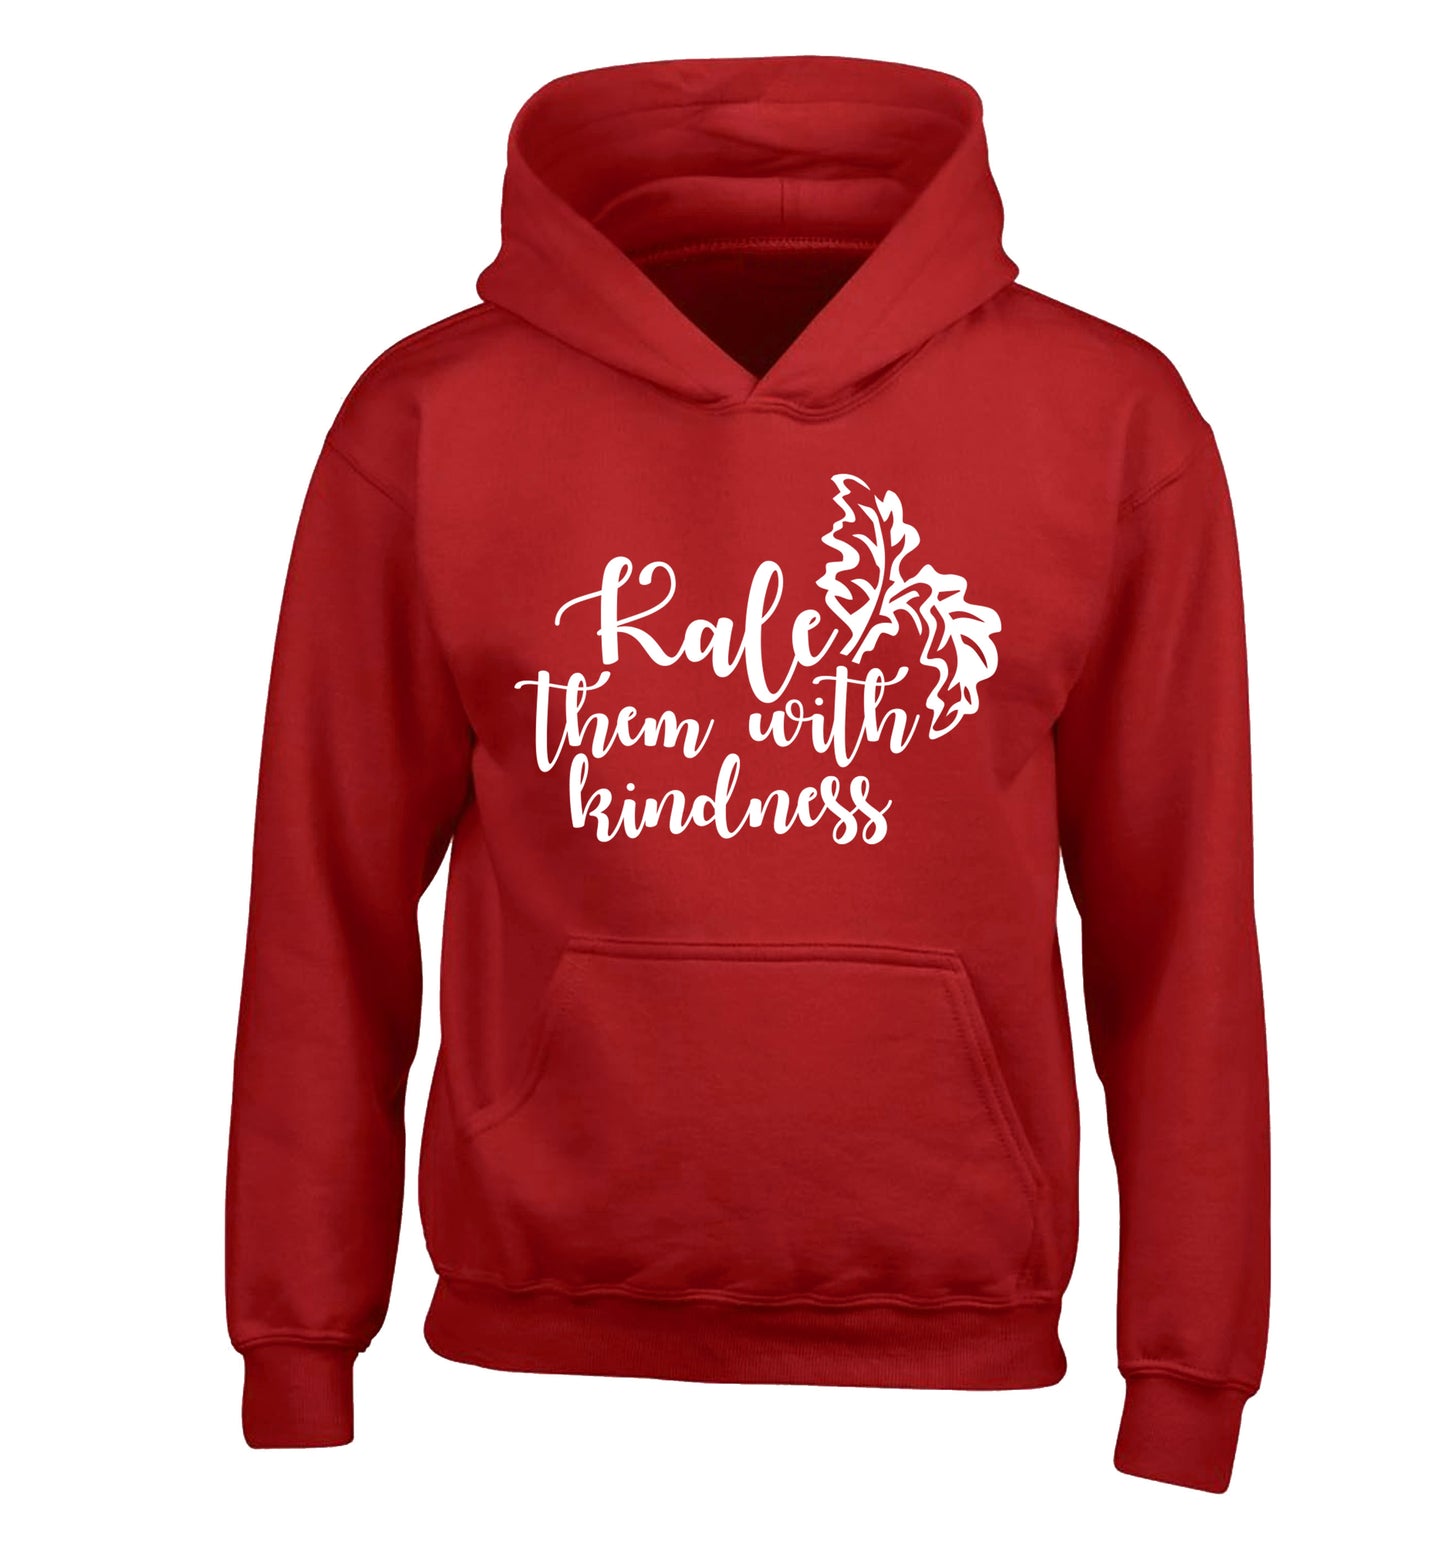 Kale them with kindness children's red hoodie 12-14 Years